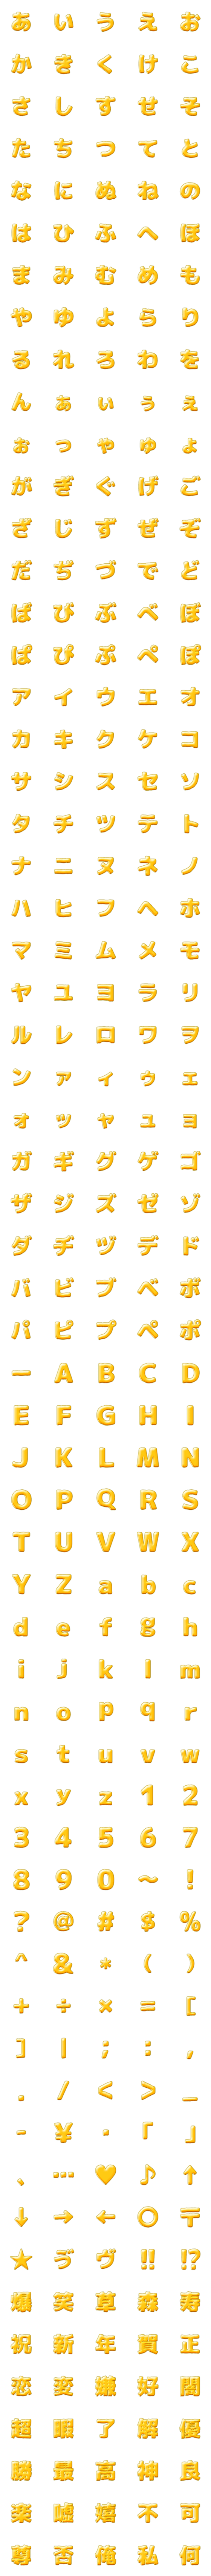 [LINE絵文字]はちみつ風デコ文字 丸ゴシックの画像一覧